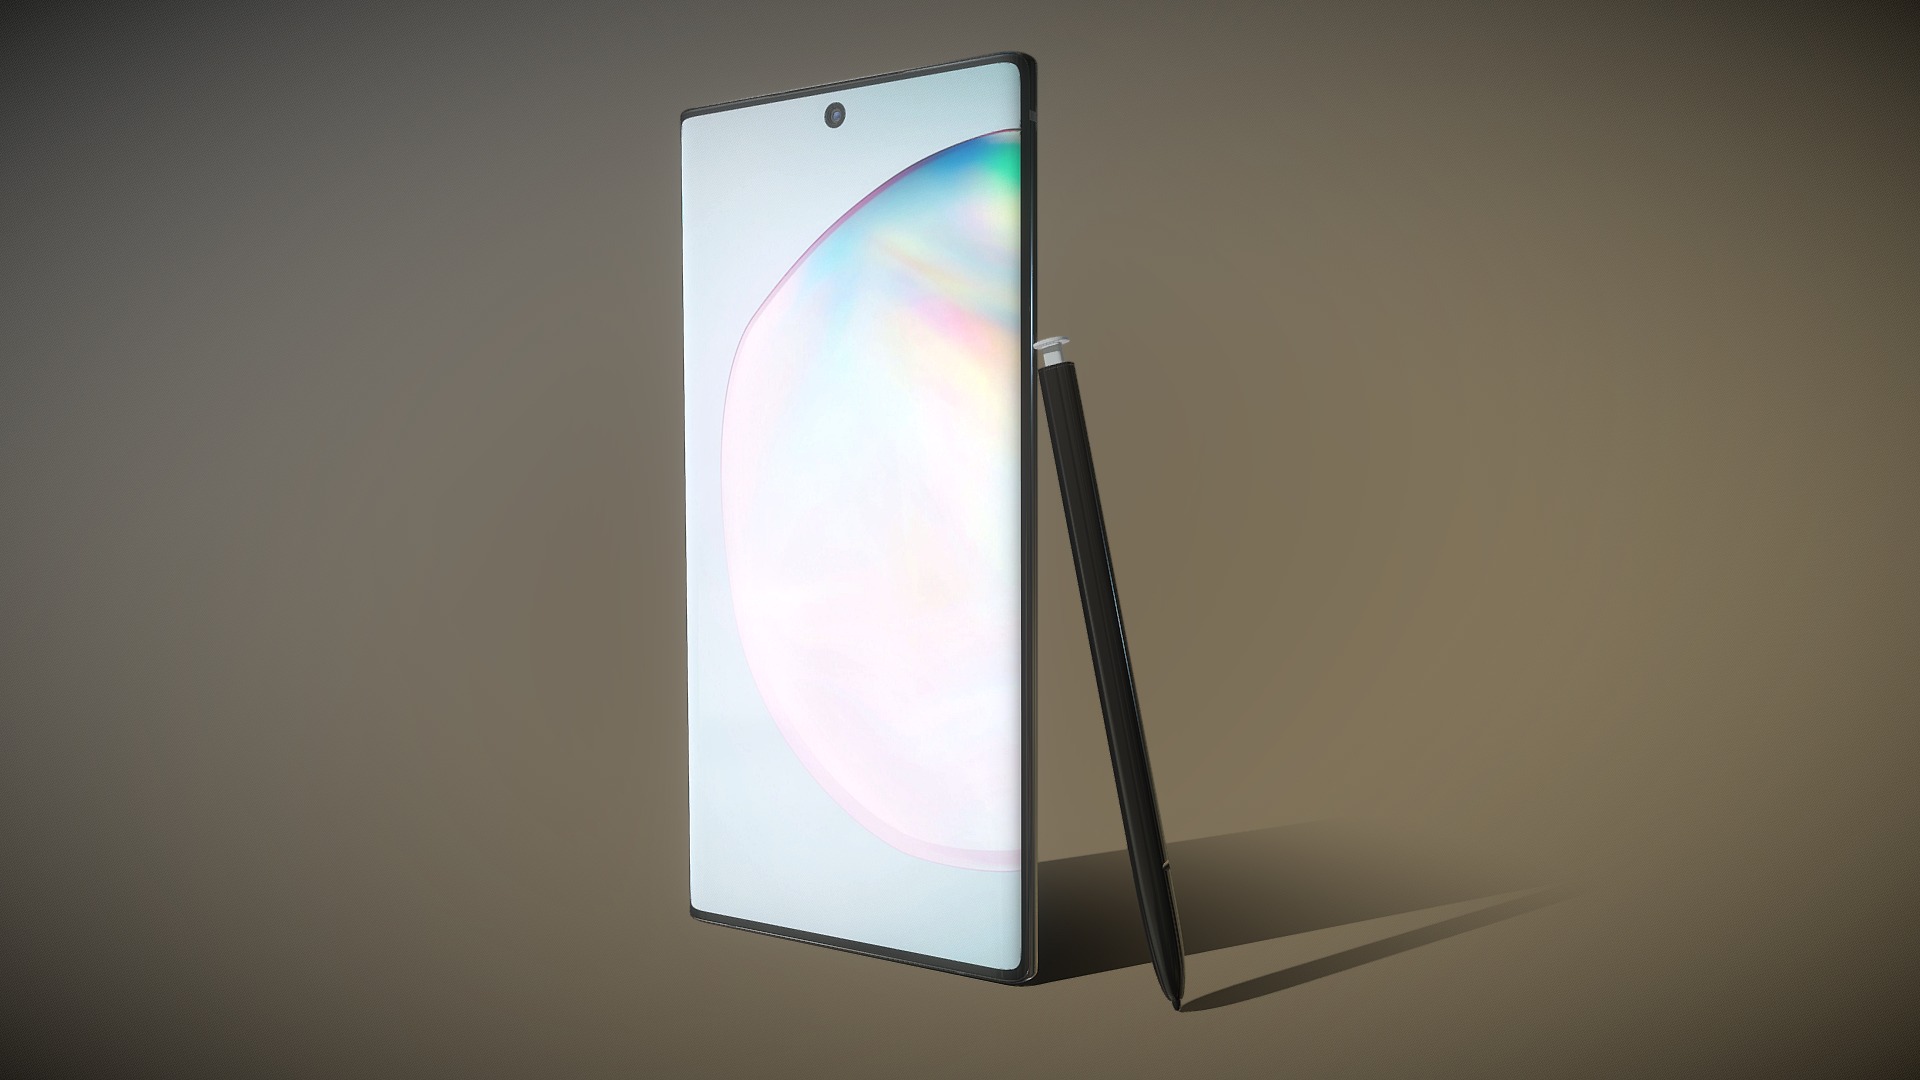 3D model Samsung Galaxy Note 10 - This is a 3D model of the Samsung Galaxy Note 10. The 3D model is about a tablet with a blue screen.